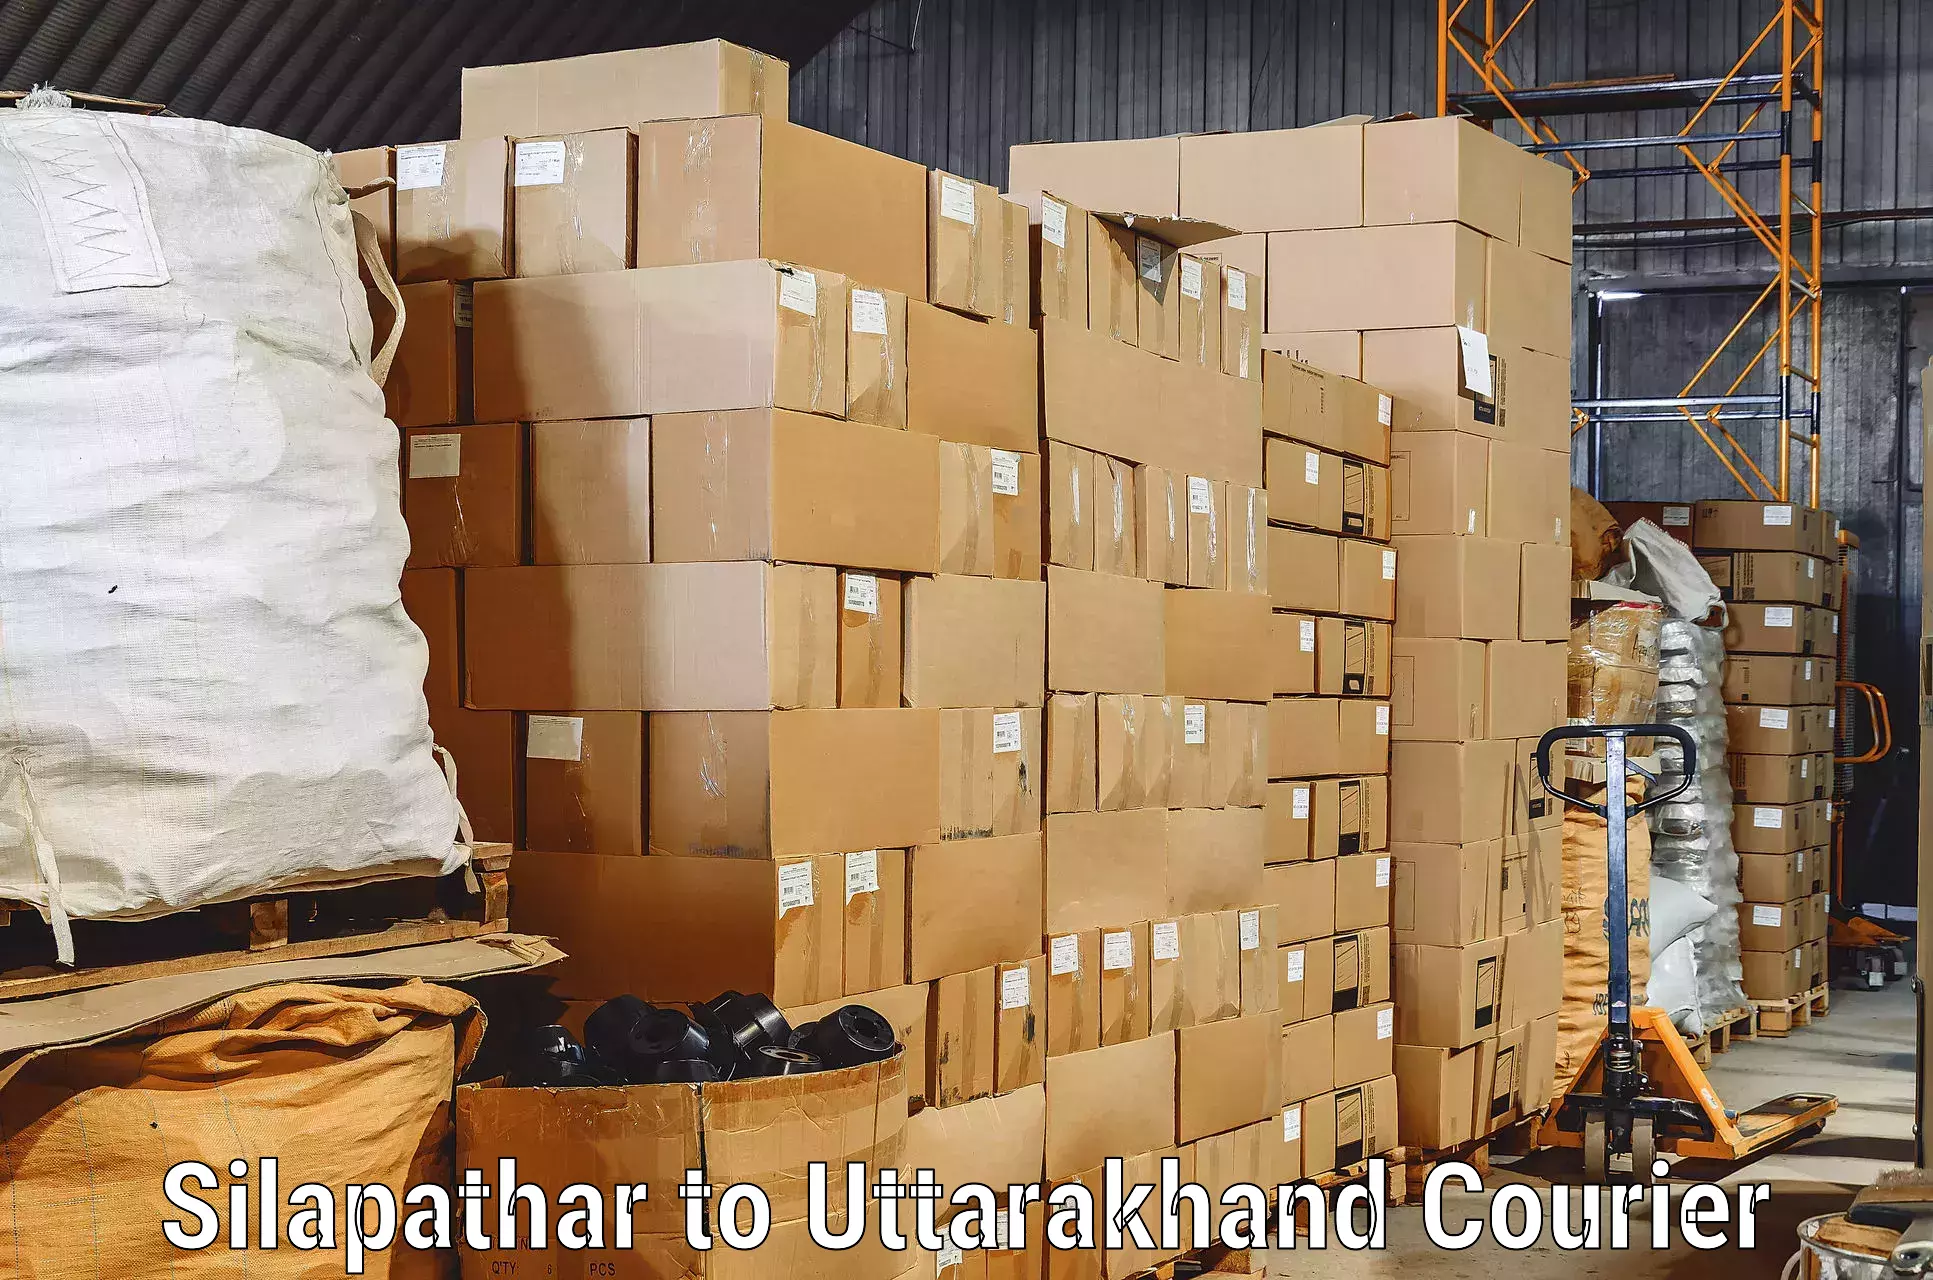 Furniture transport company Silapathar to Mussoorie